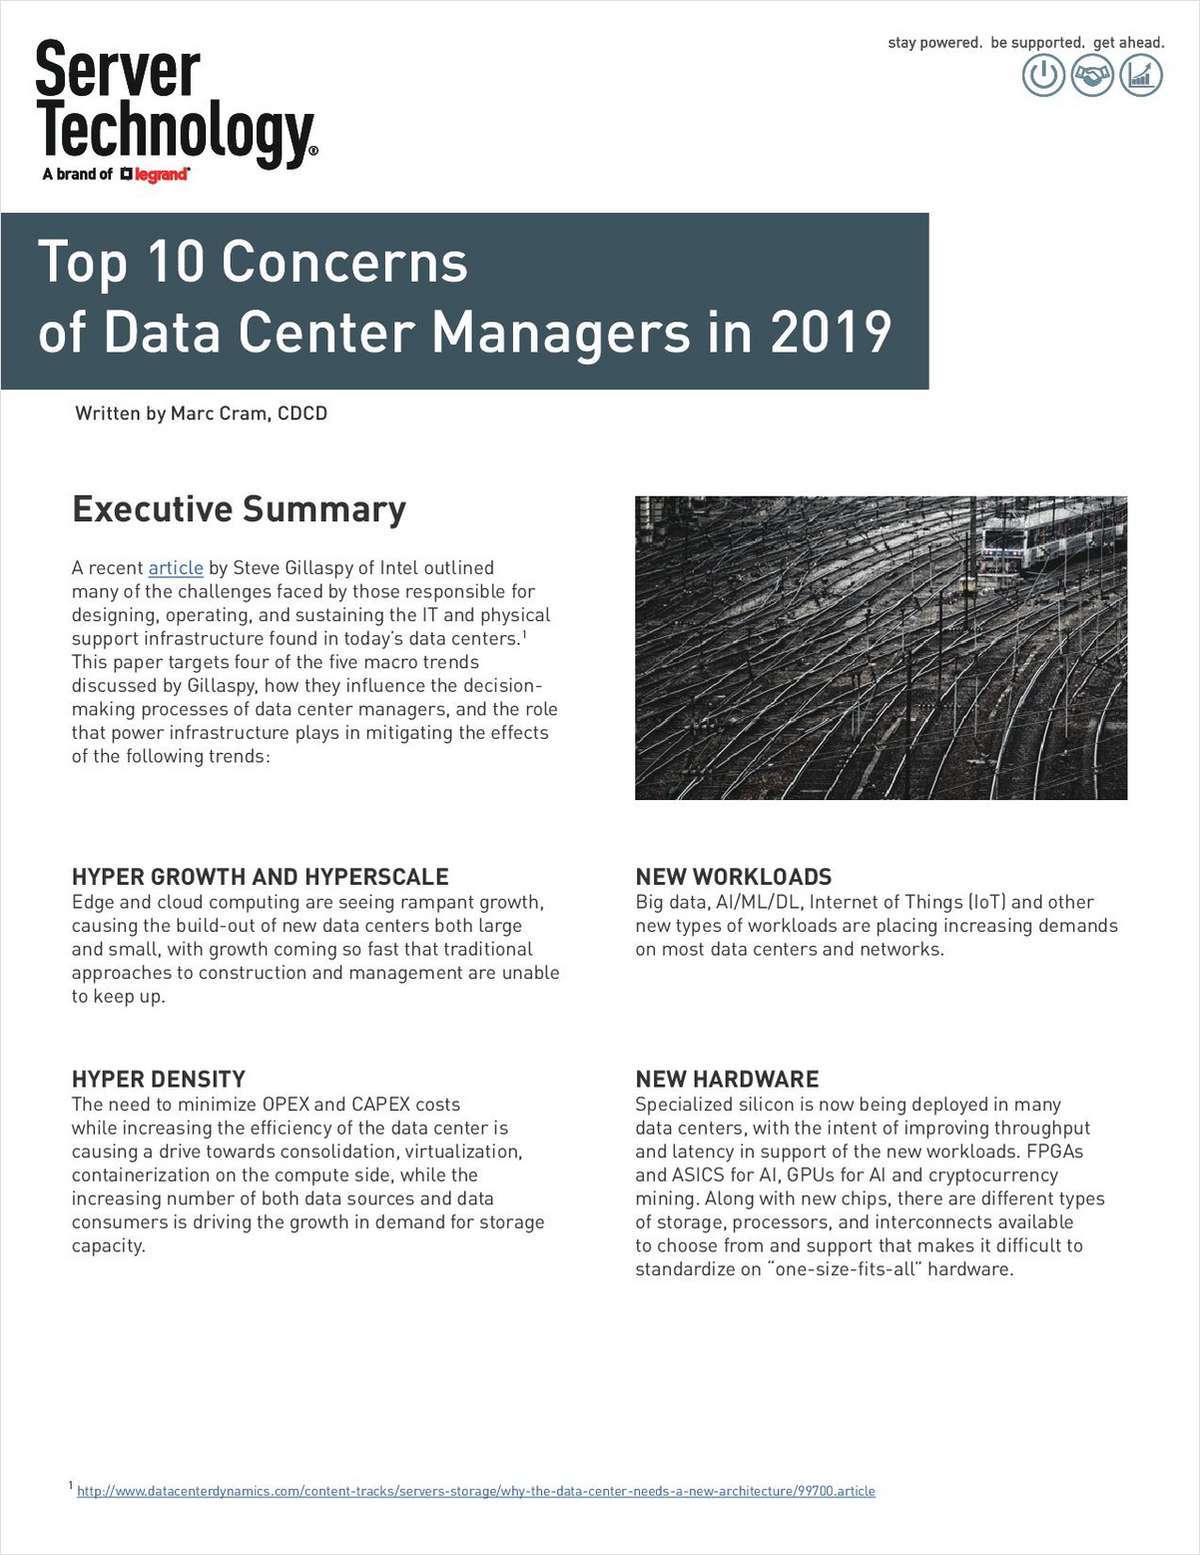 Top Ten Concerns of Data Center Managers